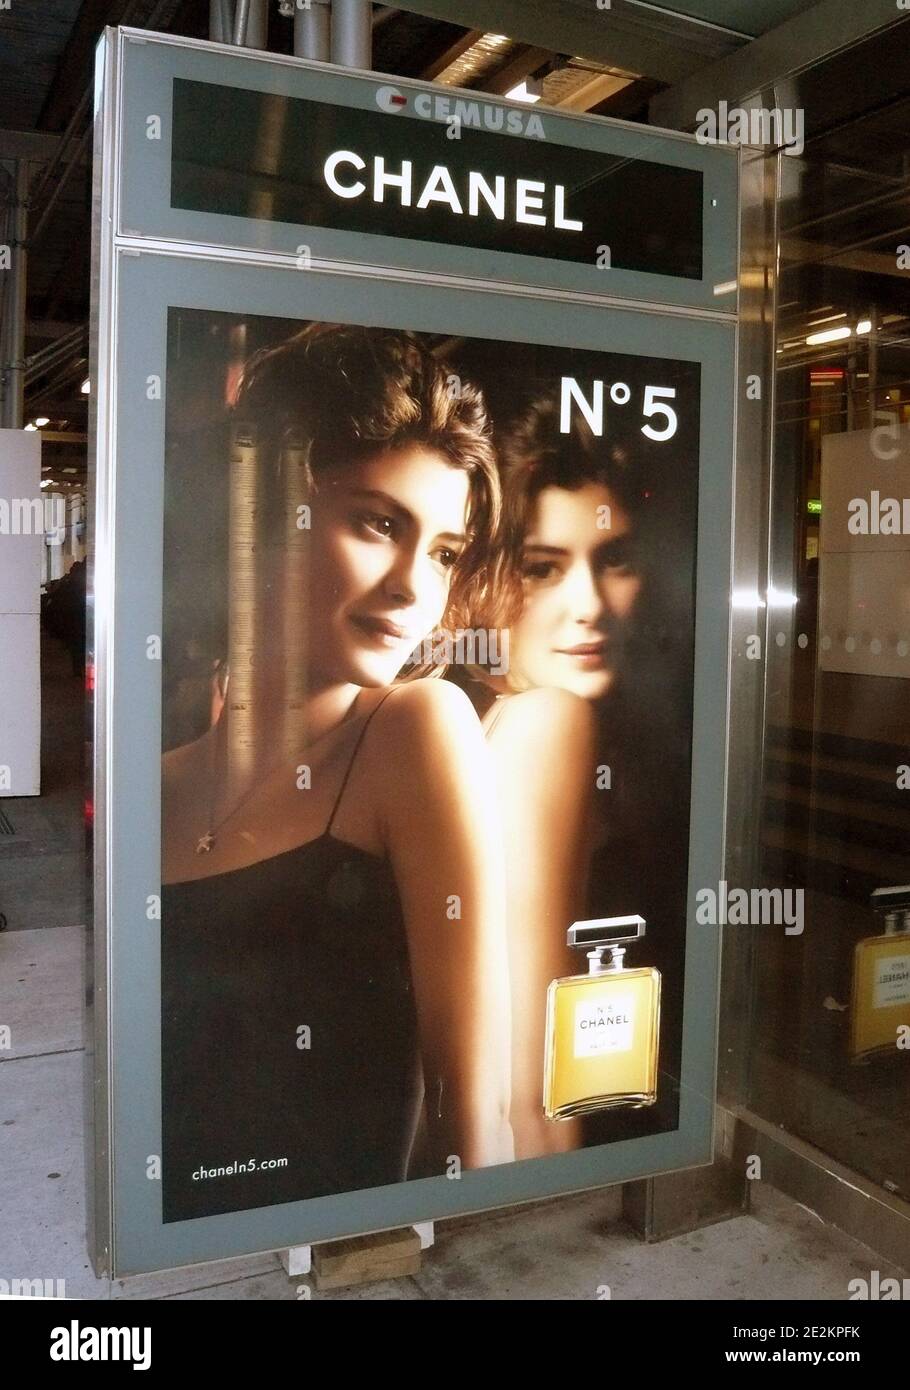 French actress Audrey Tautou is seen in an advertising campaign for the new  Chanel fragrance 'Number 5' on a bus stop in New York City, NY, USA on  January 6, 2010. Photo